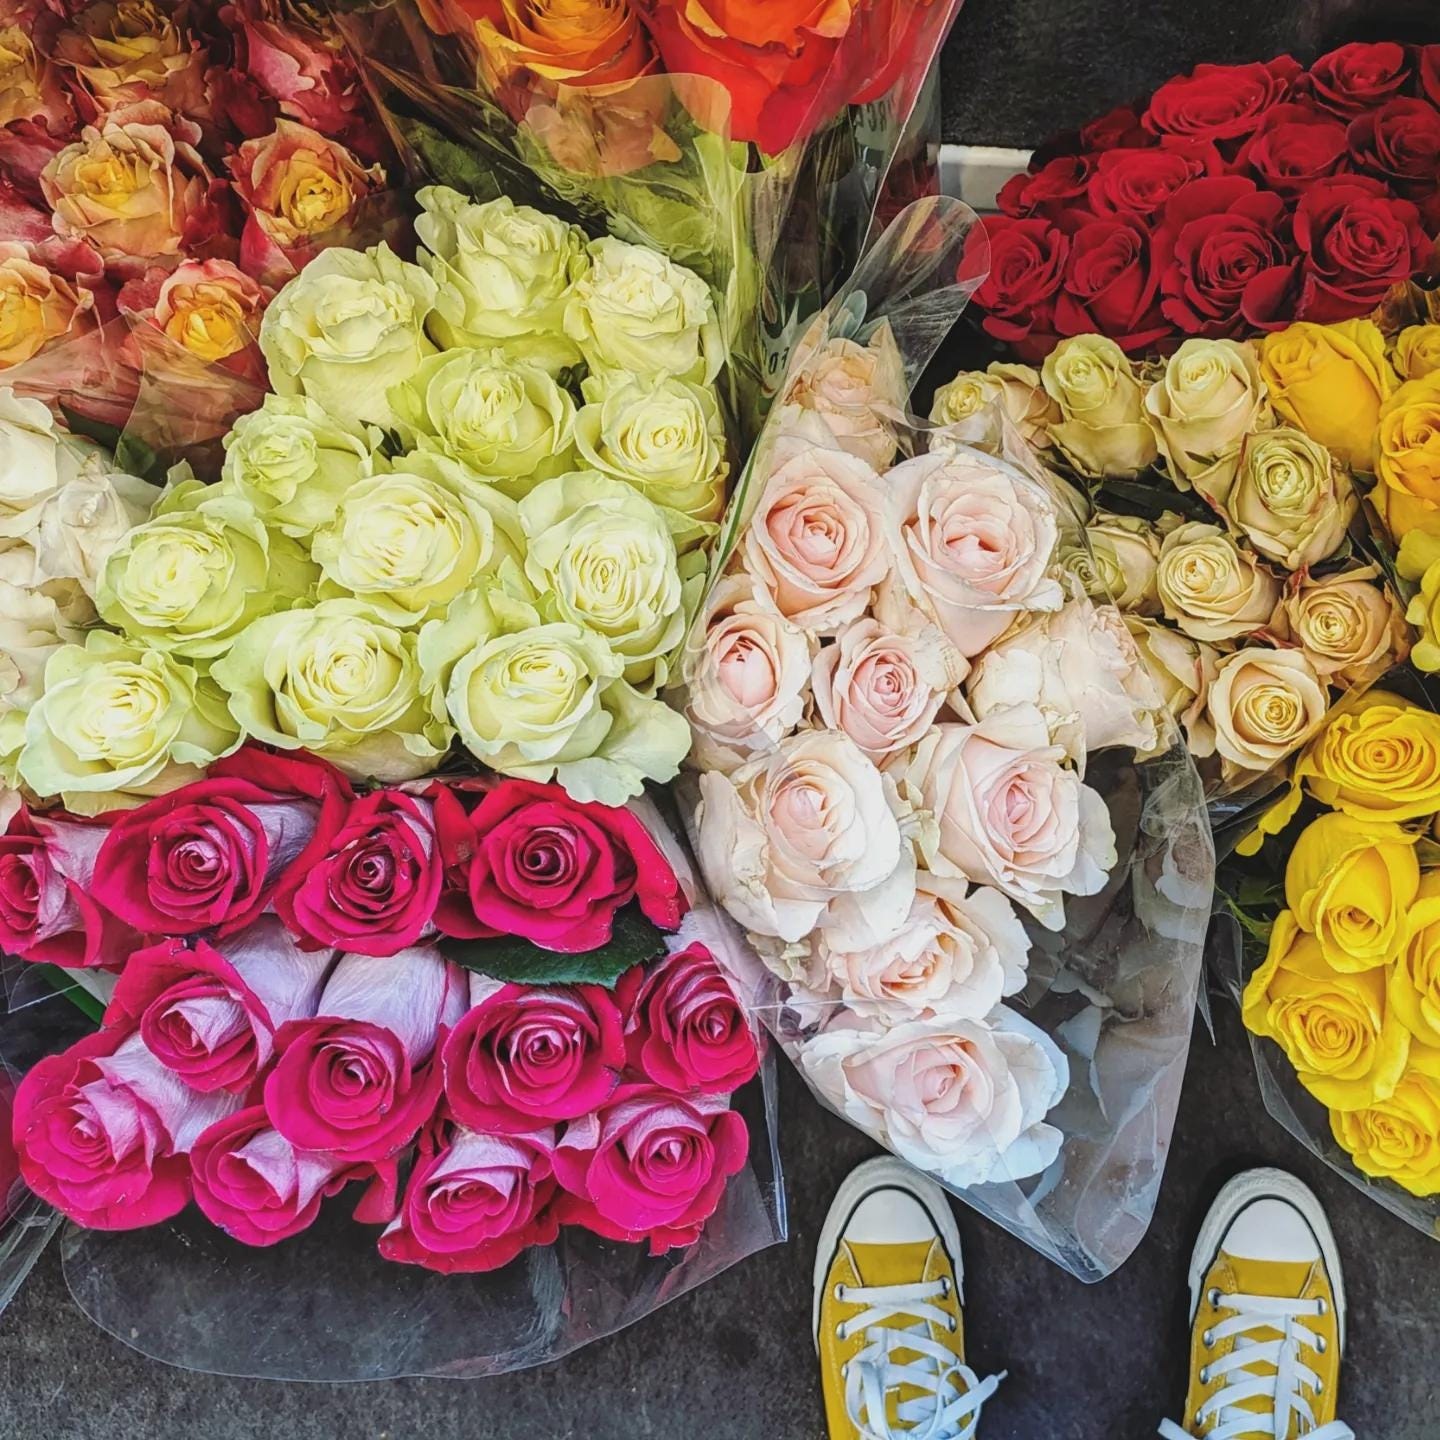 Photo of several bouquets of roses, of different colors, seen from above, with a pair of yellow sneakers peaking from the bottom right.